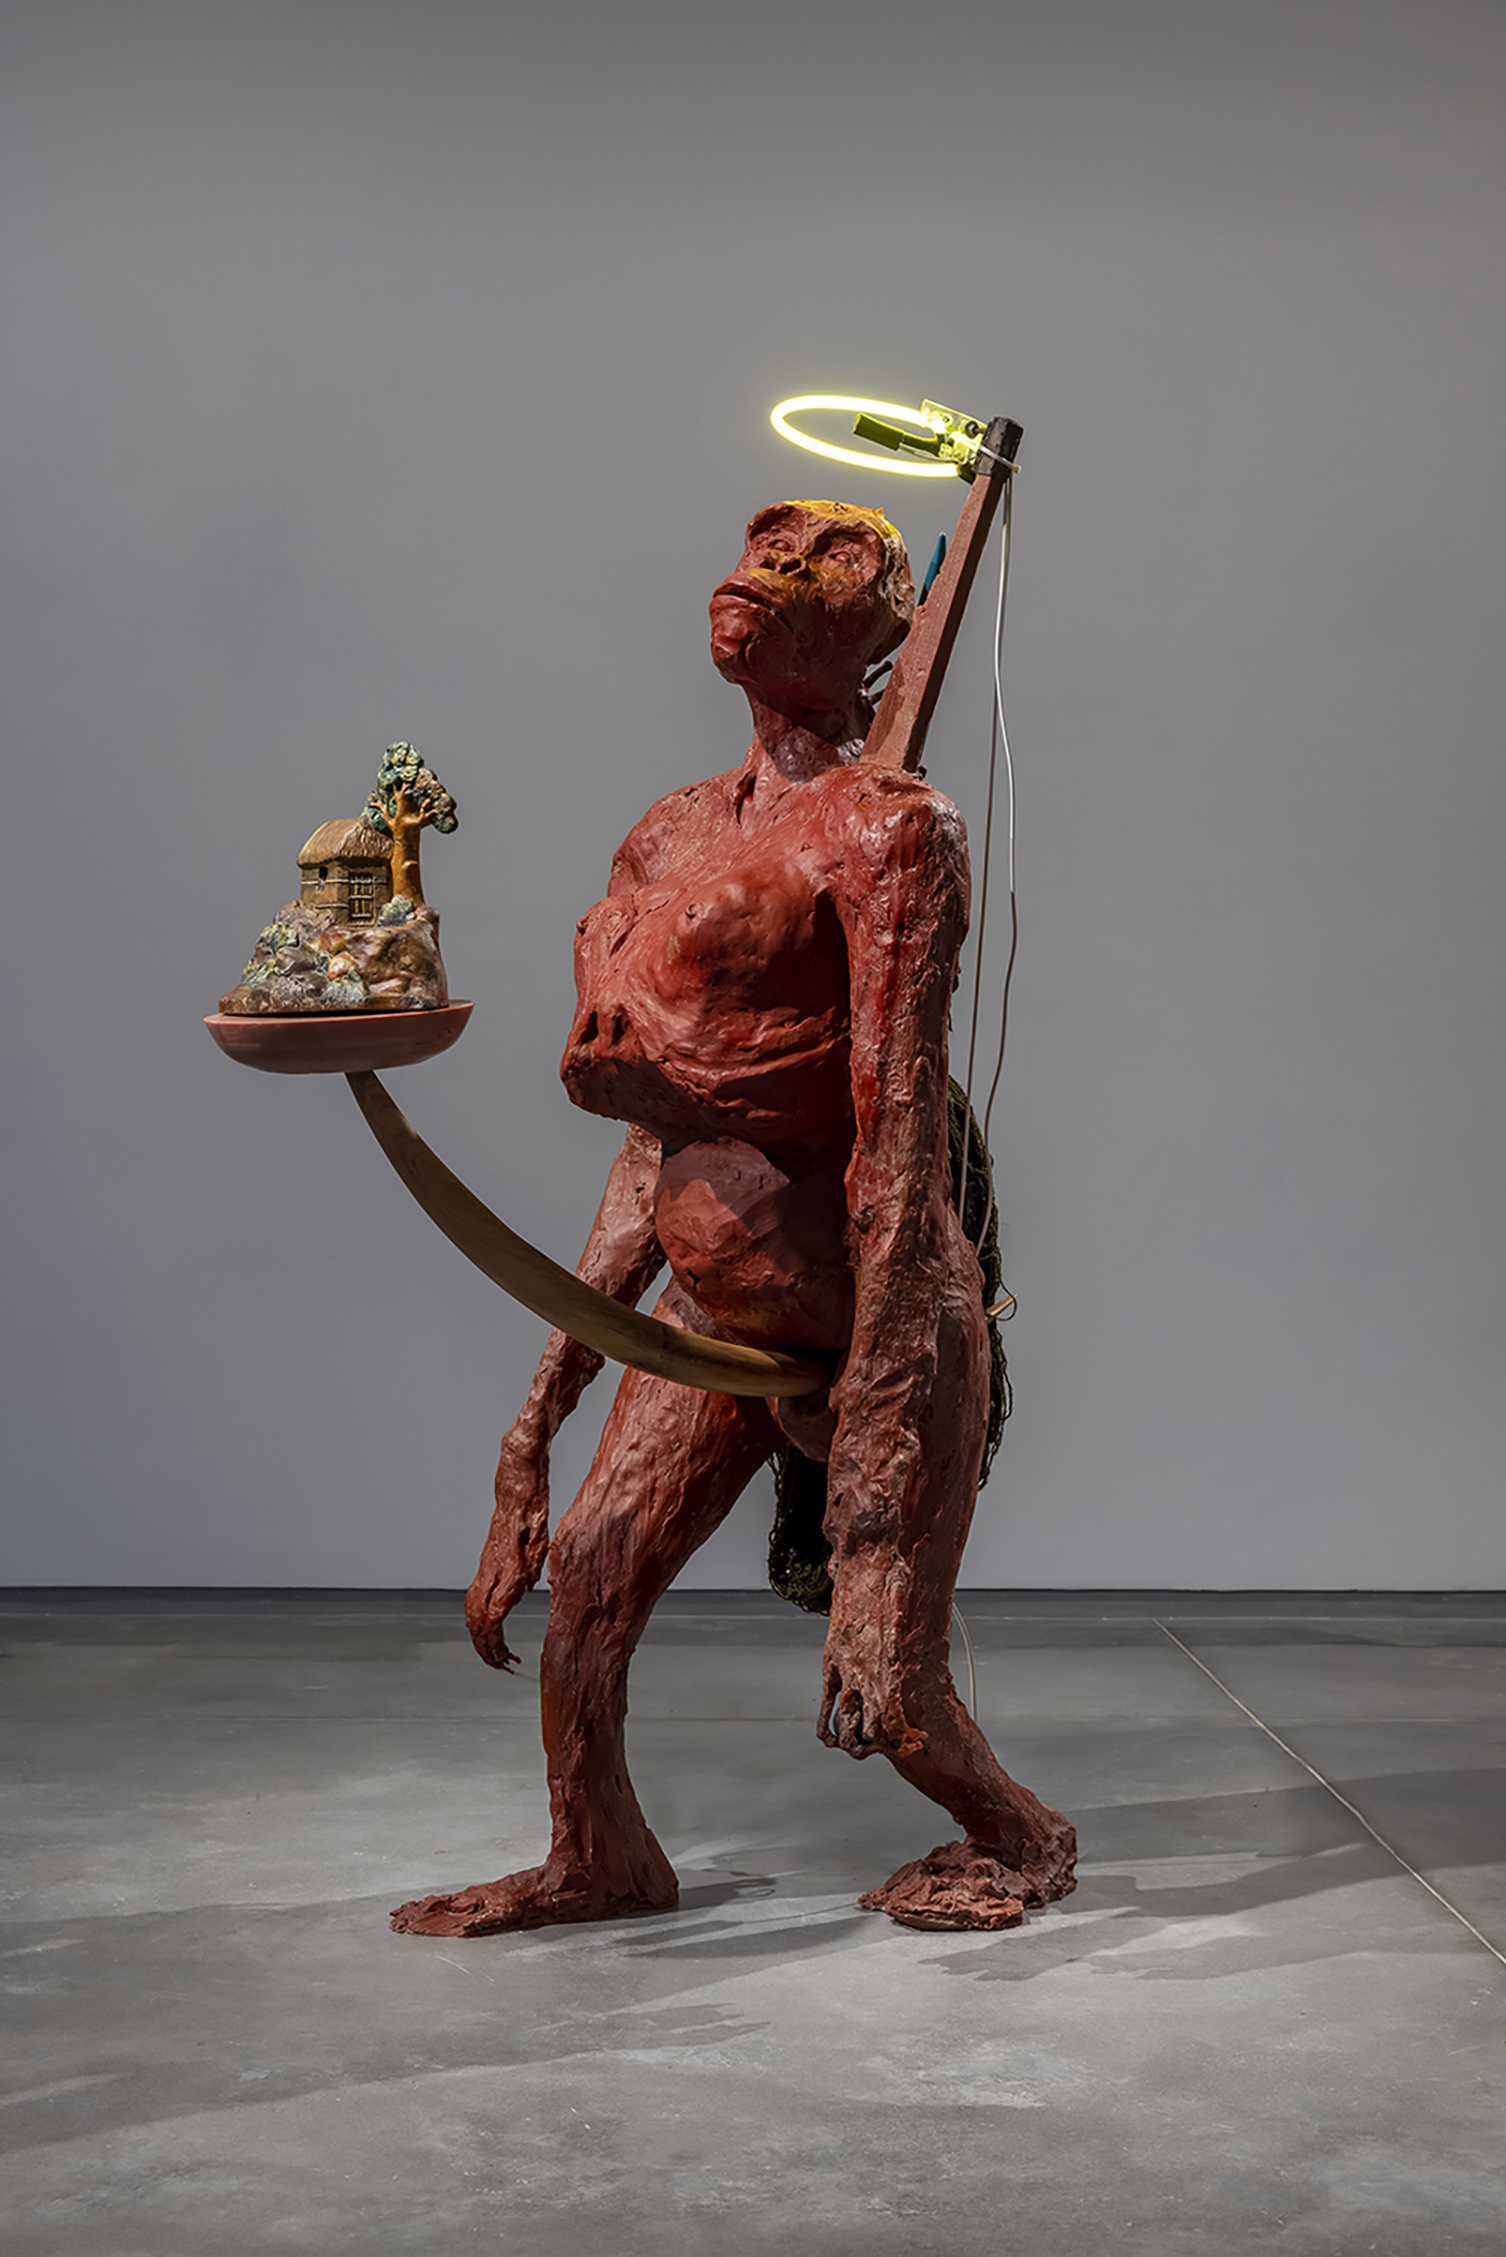 A red ape-like sculpture, with a glowing halo and a small house on a platform coming out of it's stomach.